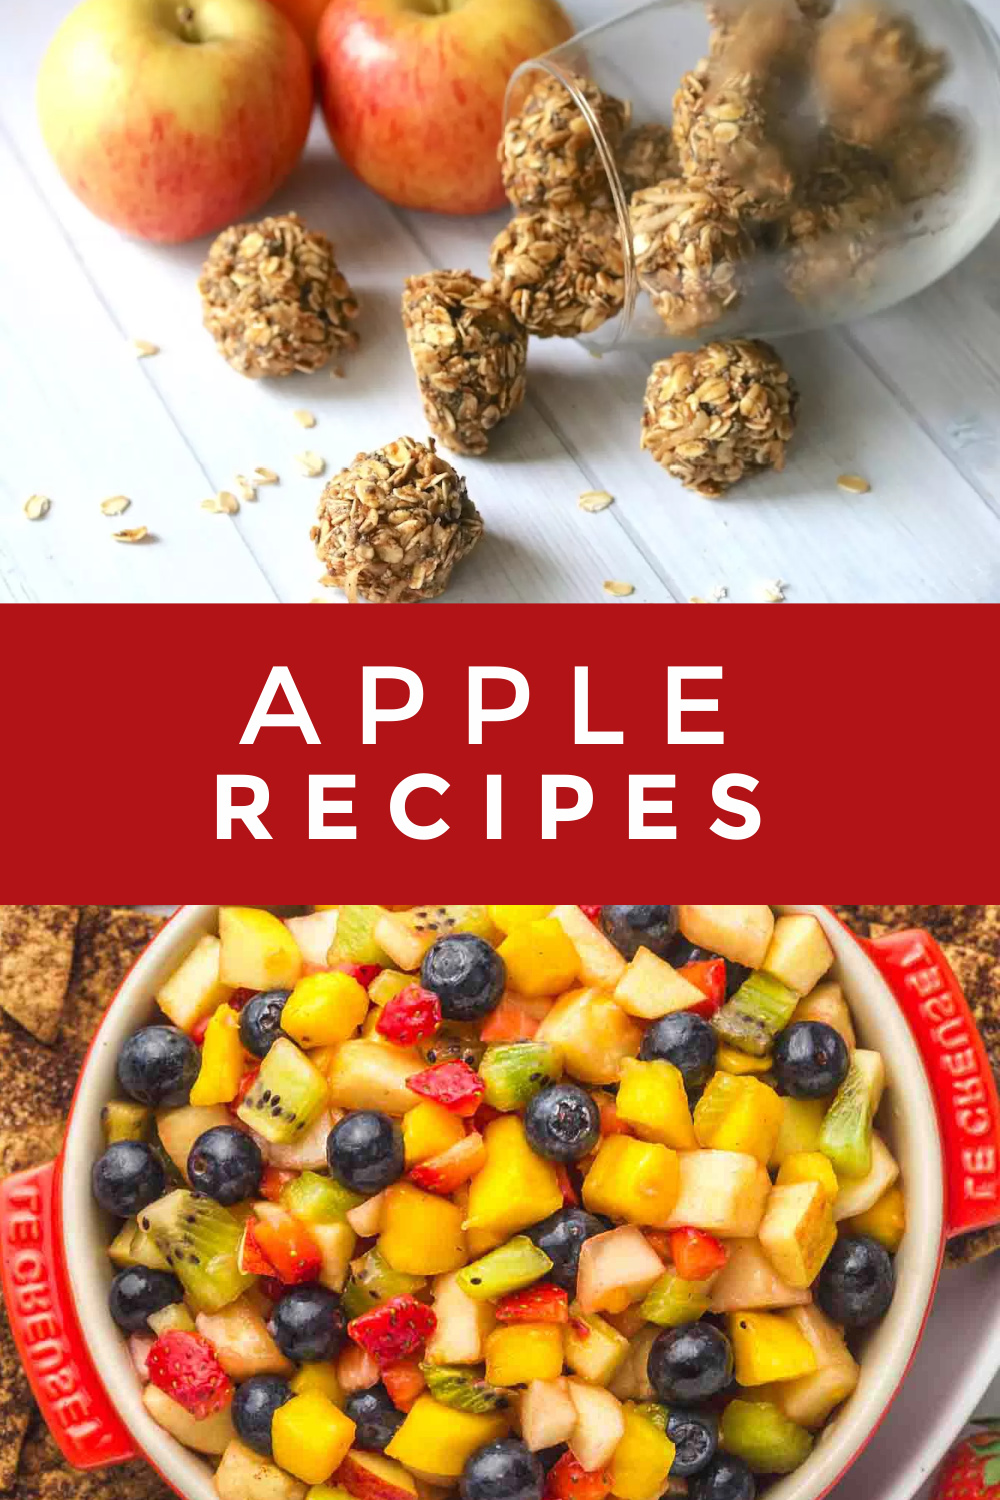 What to make with Apples: 76 delicious recipes - What To Make To Eat